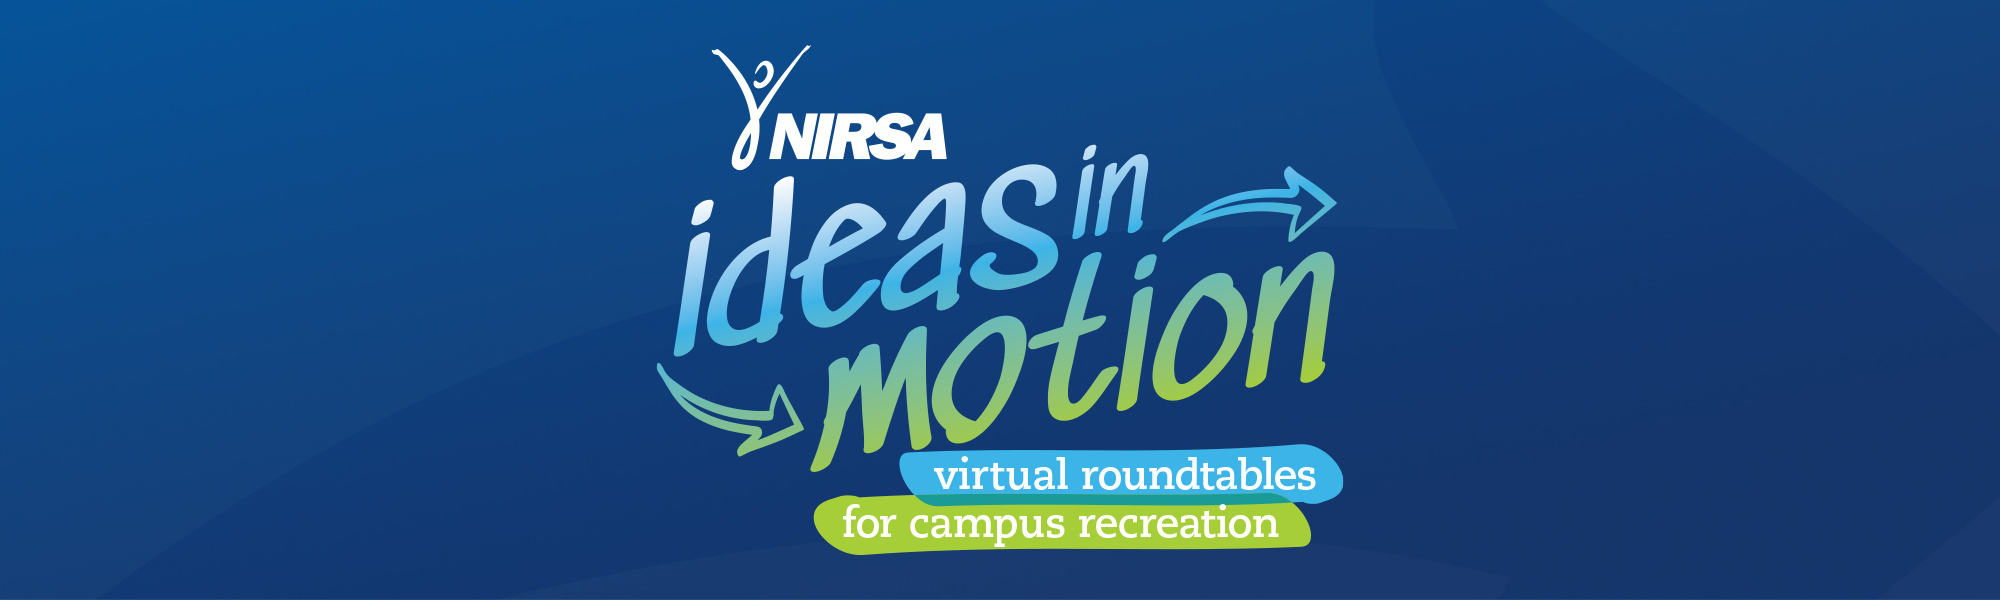 Senior Leaders Ideas in Motion - New to Higher Education? We got you covered!